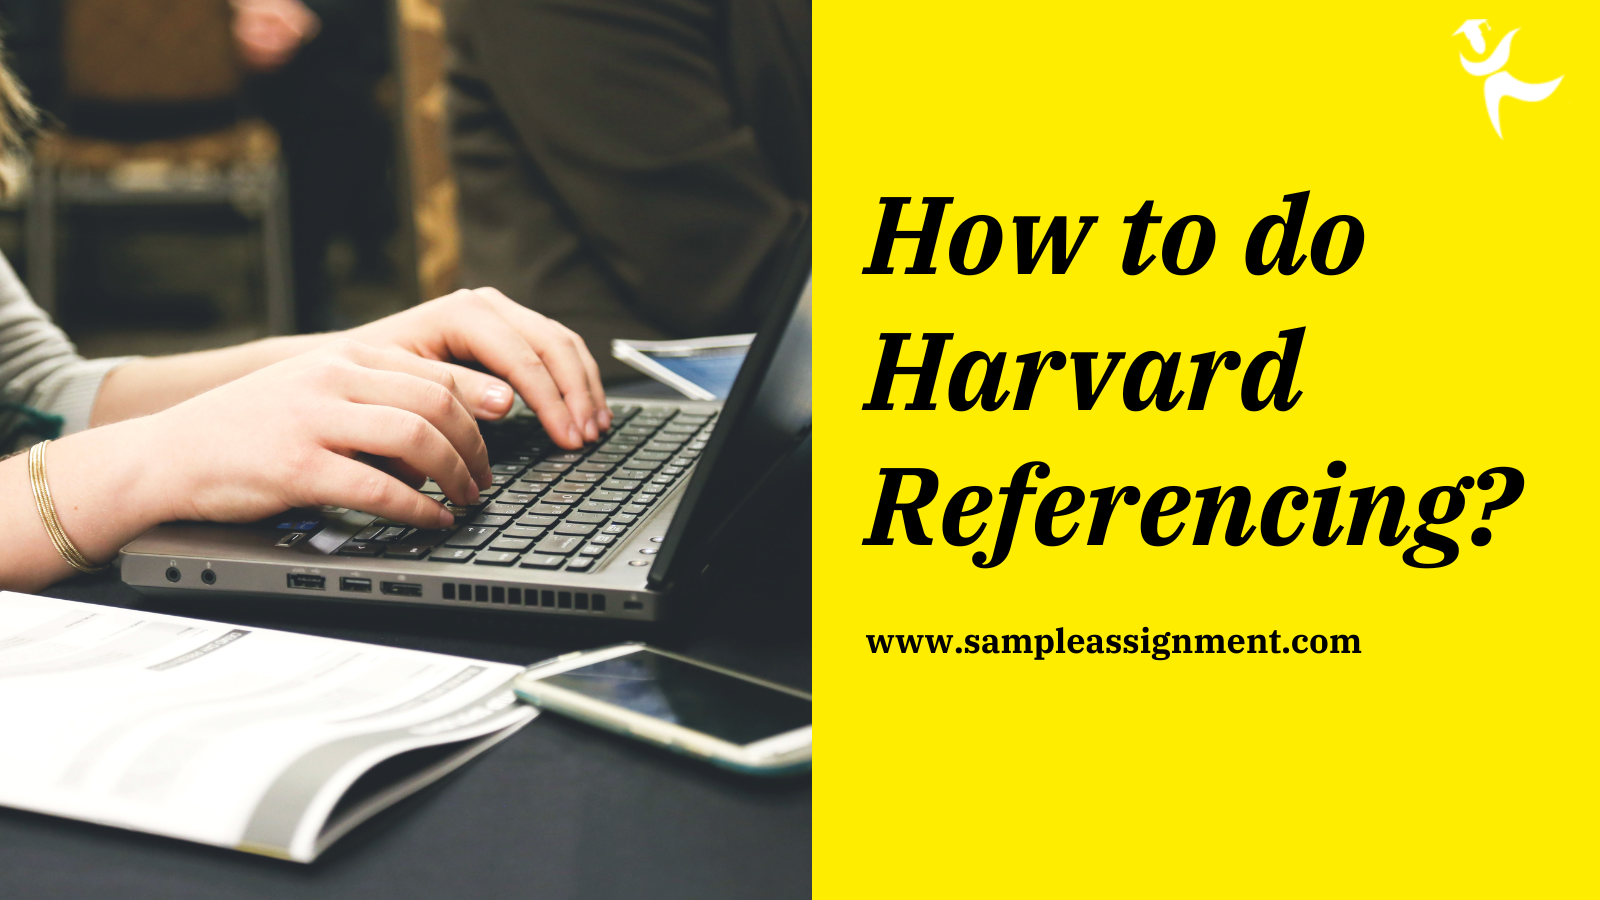 How to do Harvard Referencing?